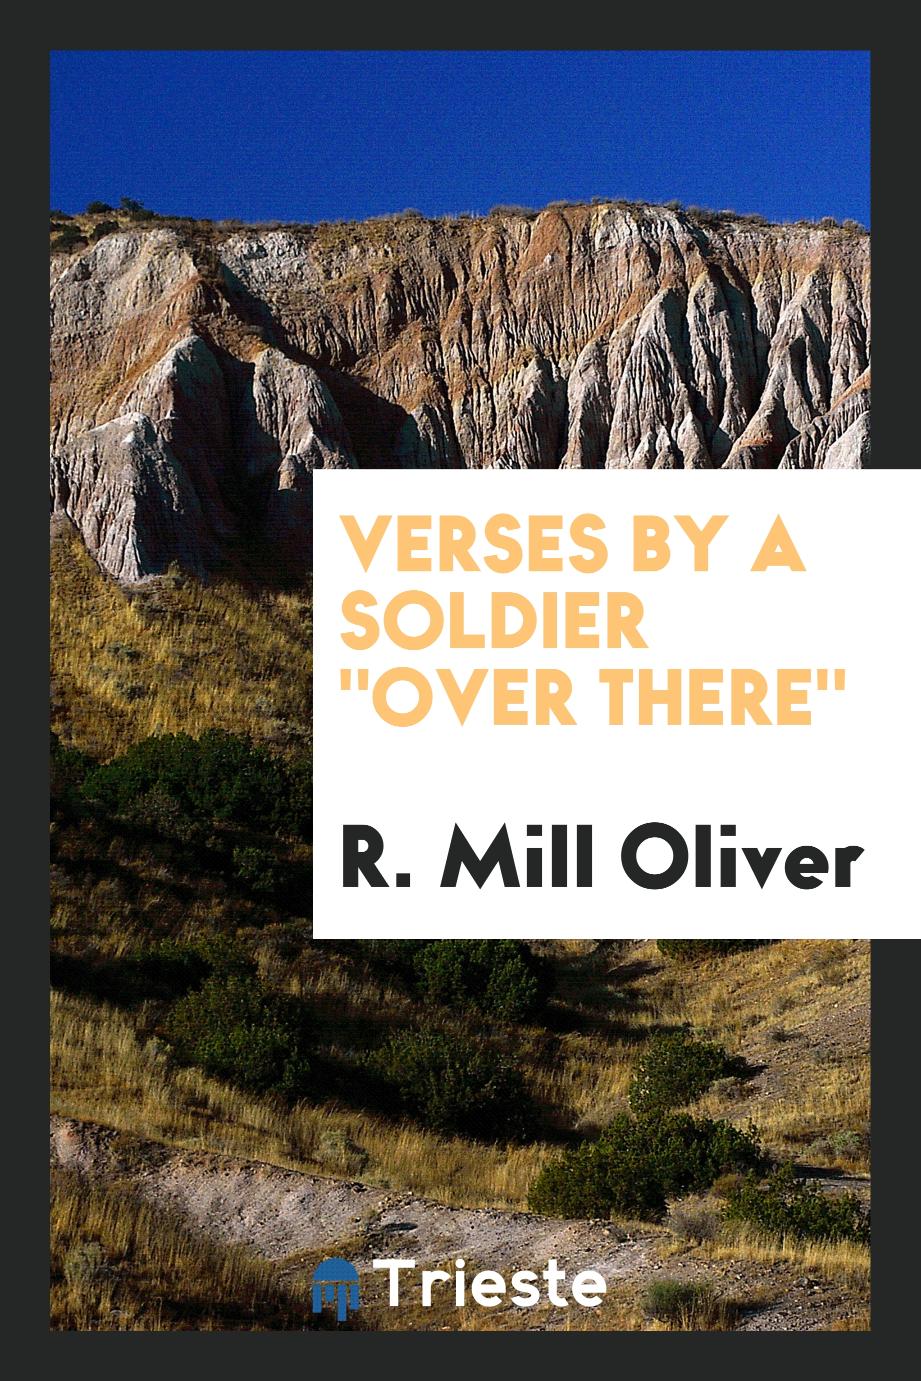 Verses by a soldier "over there"